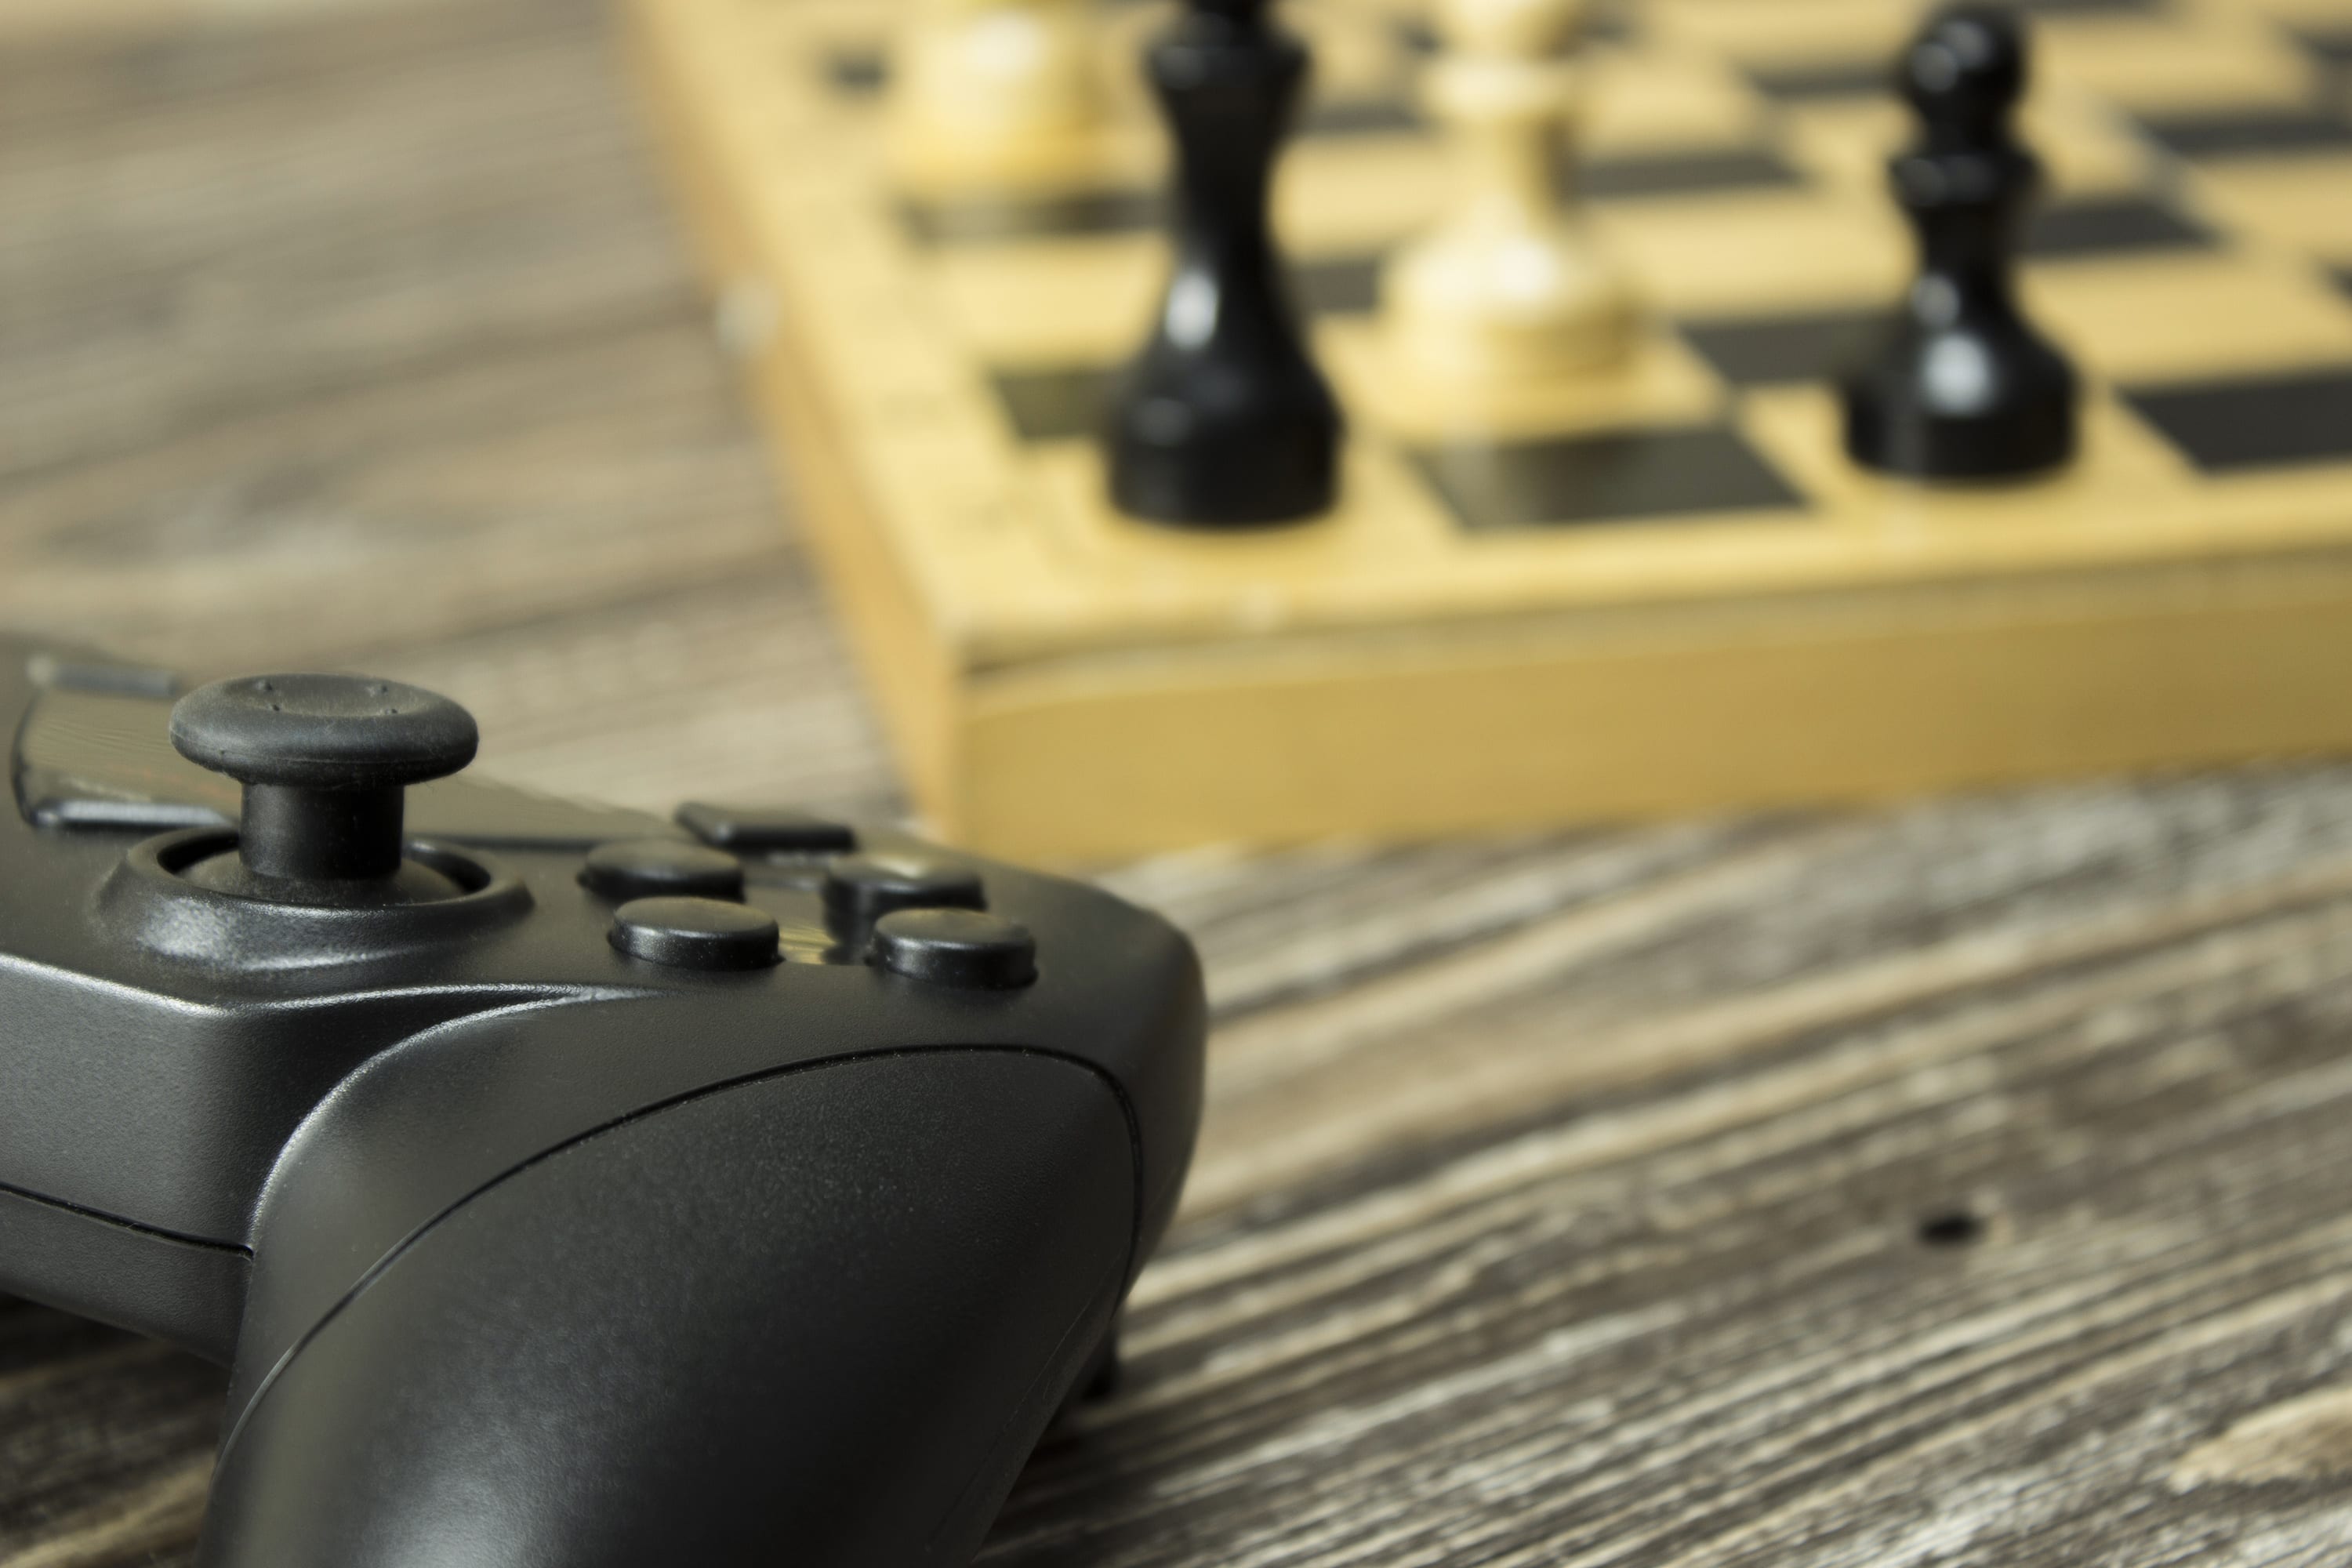 Gamepad and chess board with figures on the wooden background. Focus on gamepad